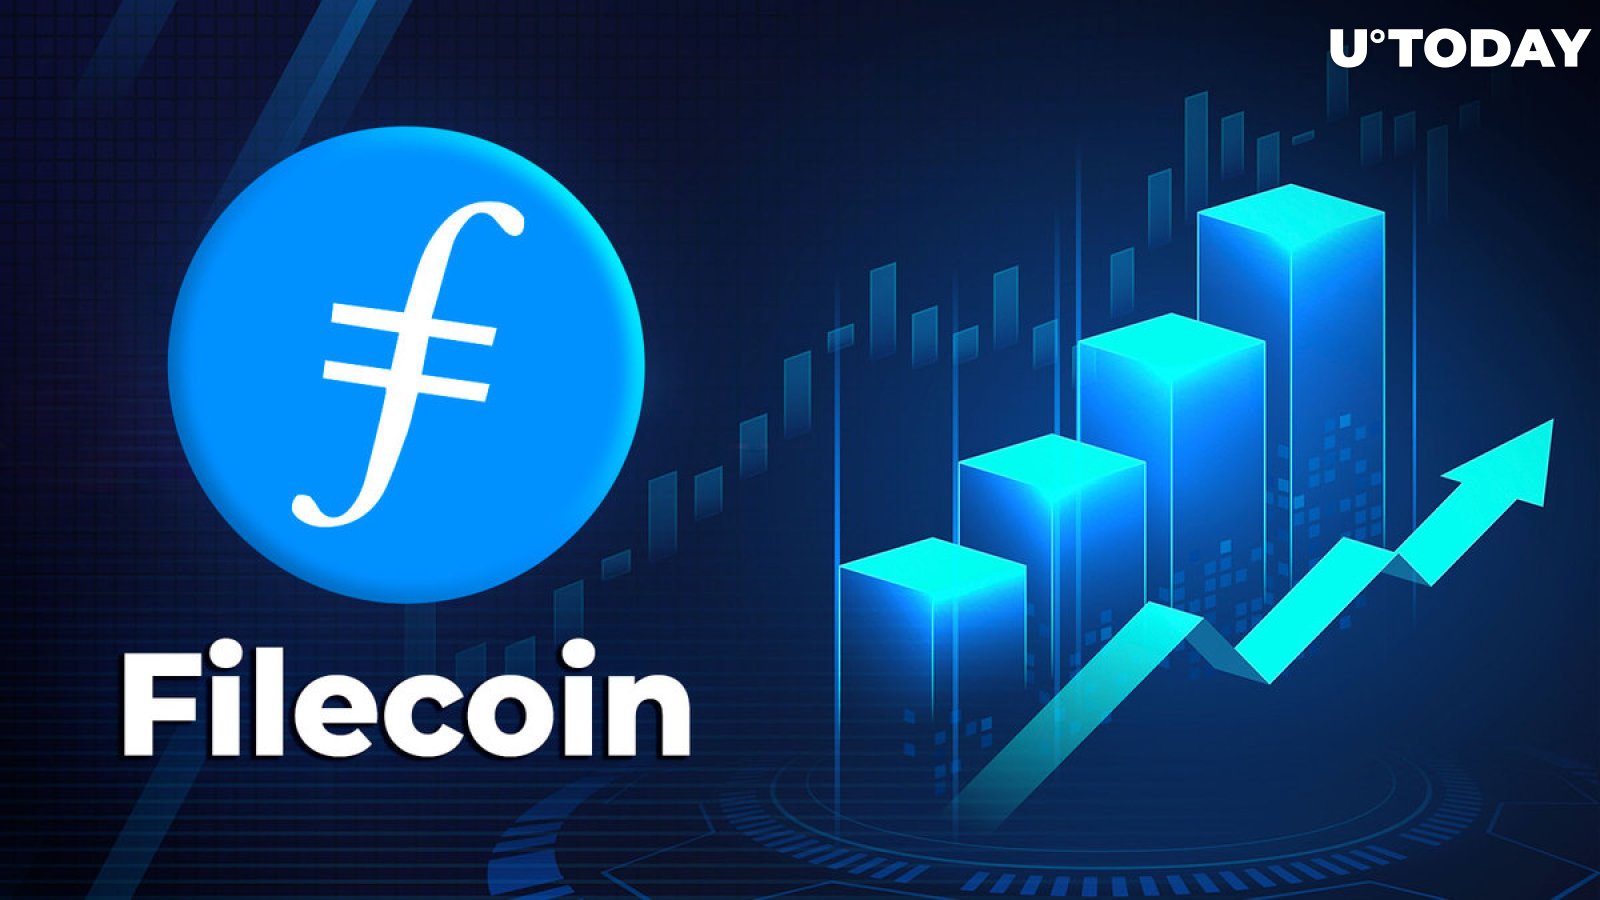 Filecoin (FIL) Soars 17% as New Breakthrough Looms